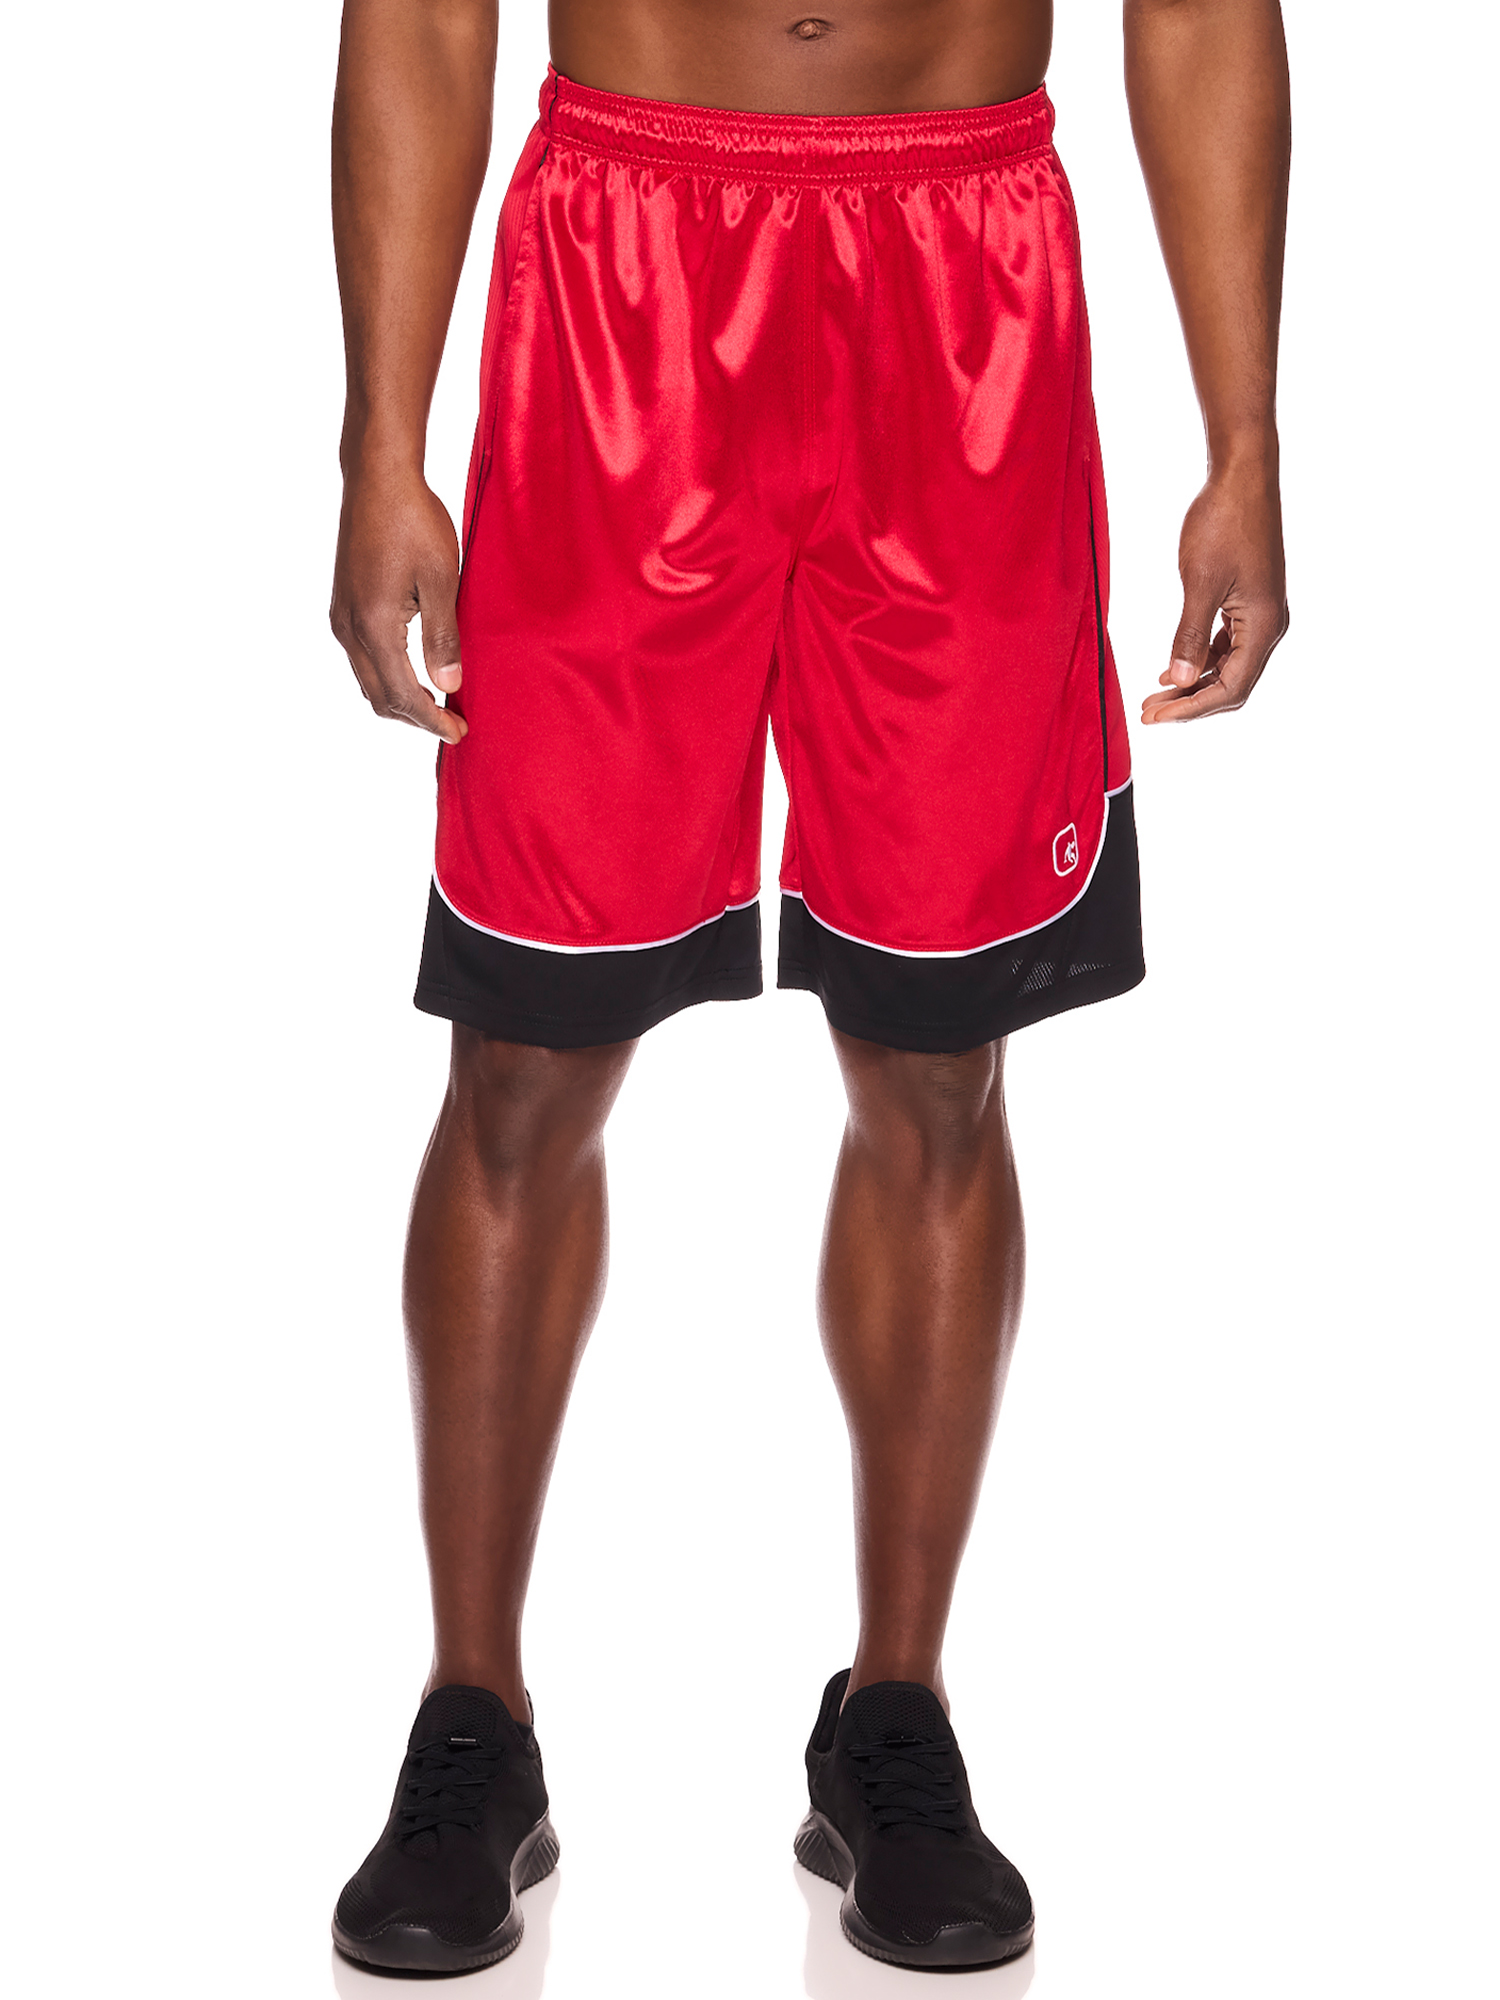 AND1 Men and Big Men's All Court Colorblock 11" Shorts, up to Size 3XL - image 1 of 5